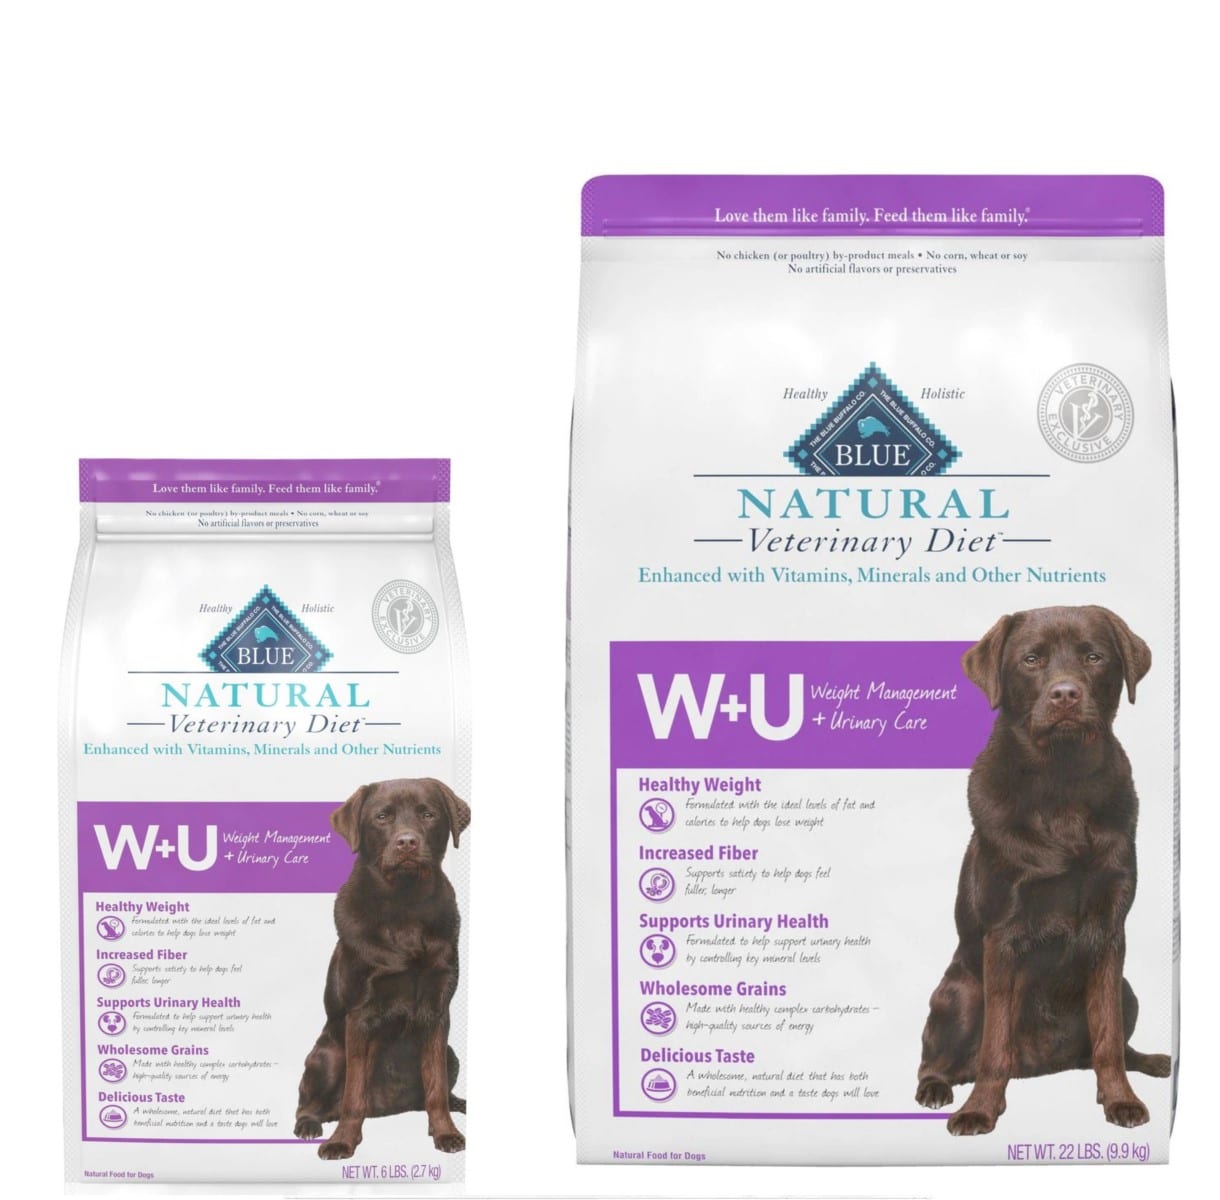 Blue Buffalo Natural Veterinary Diet W+U Weight Management + Urinary Care Dry Dog Food